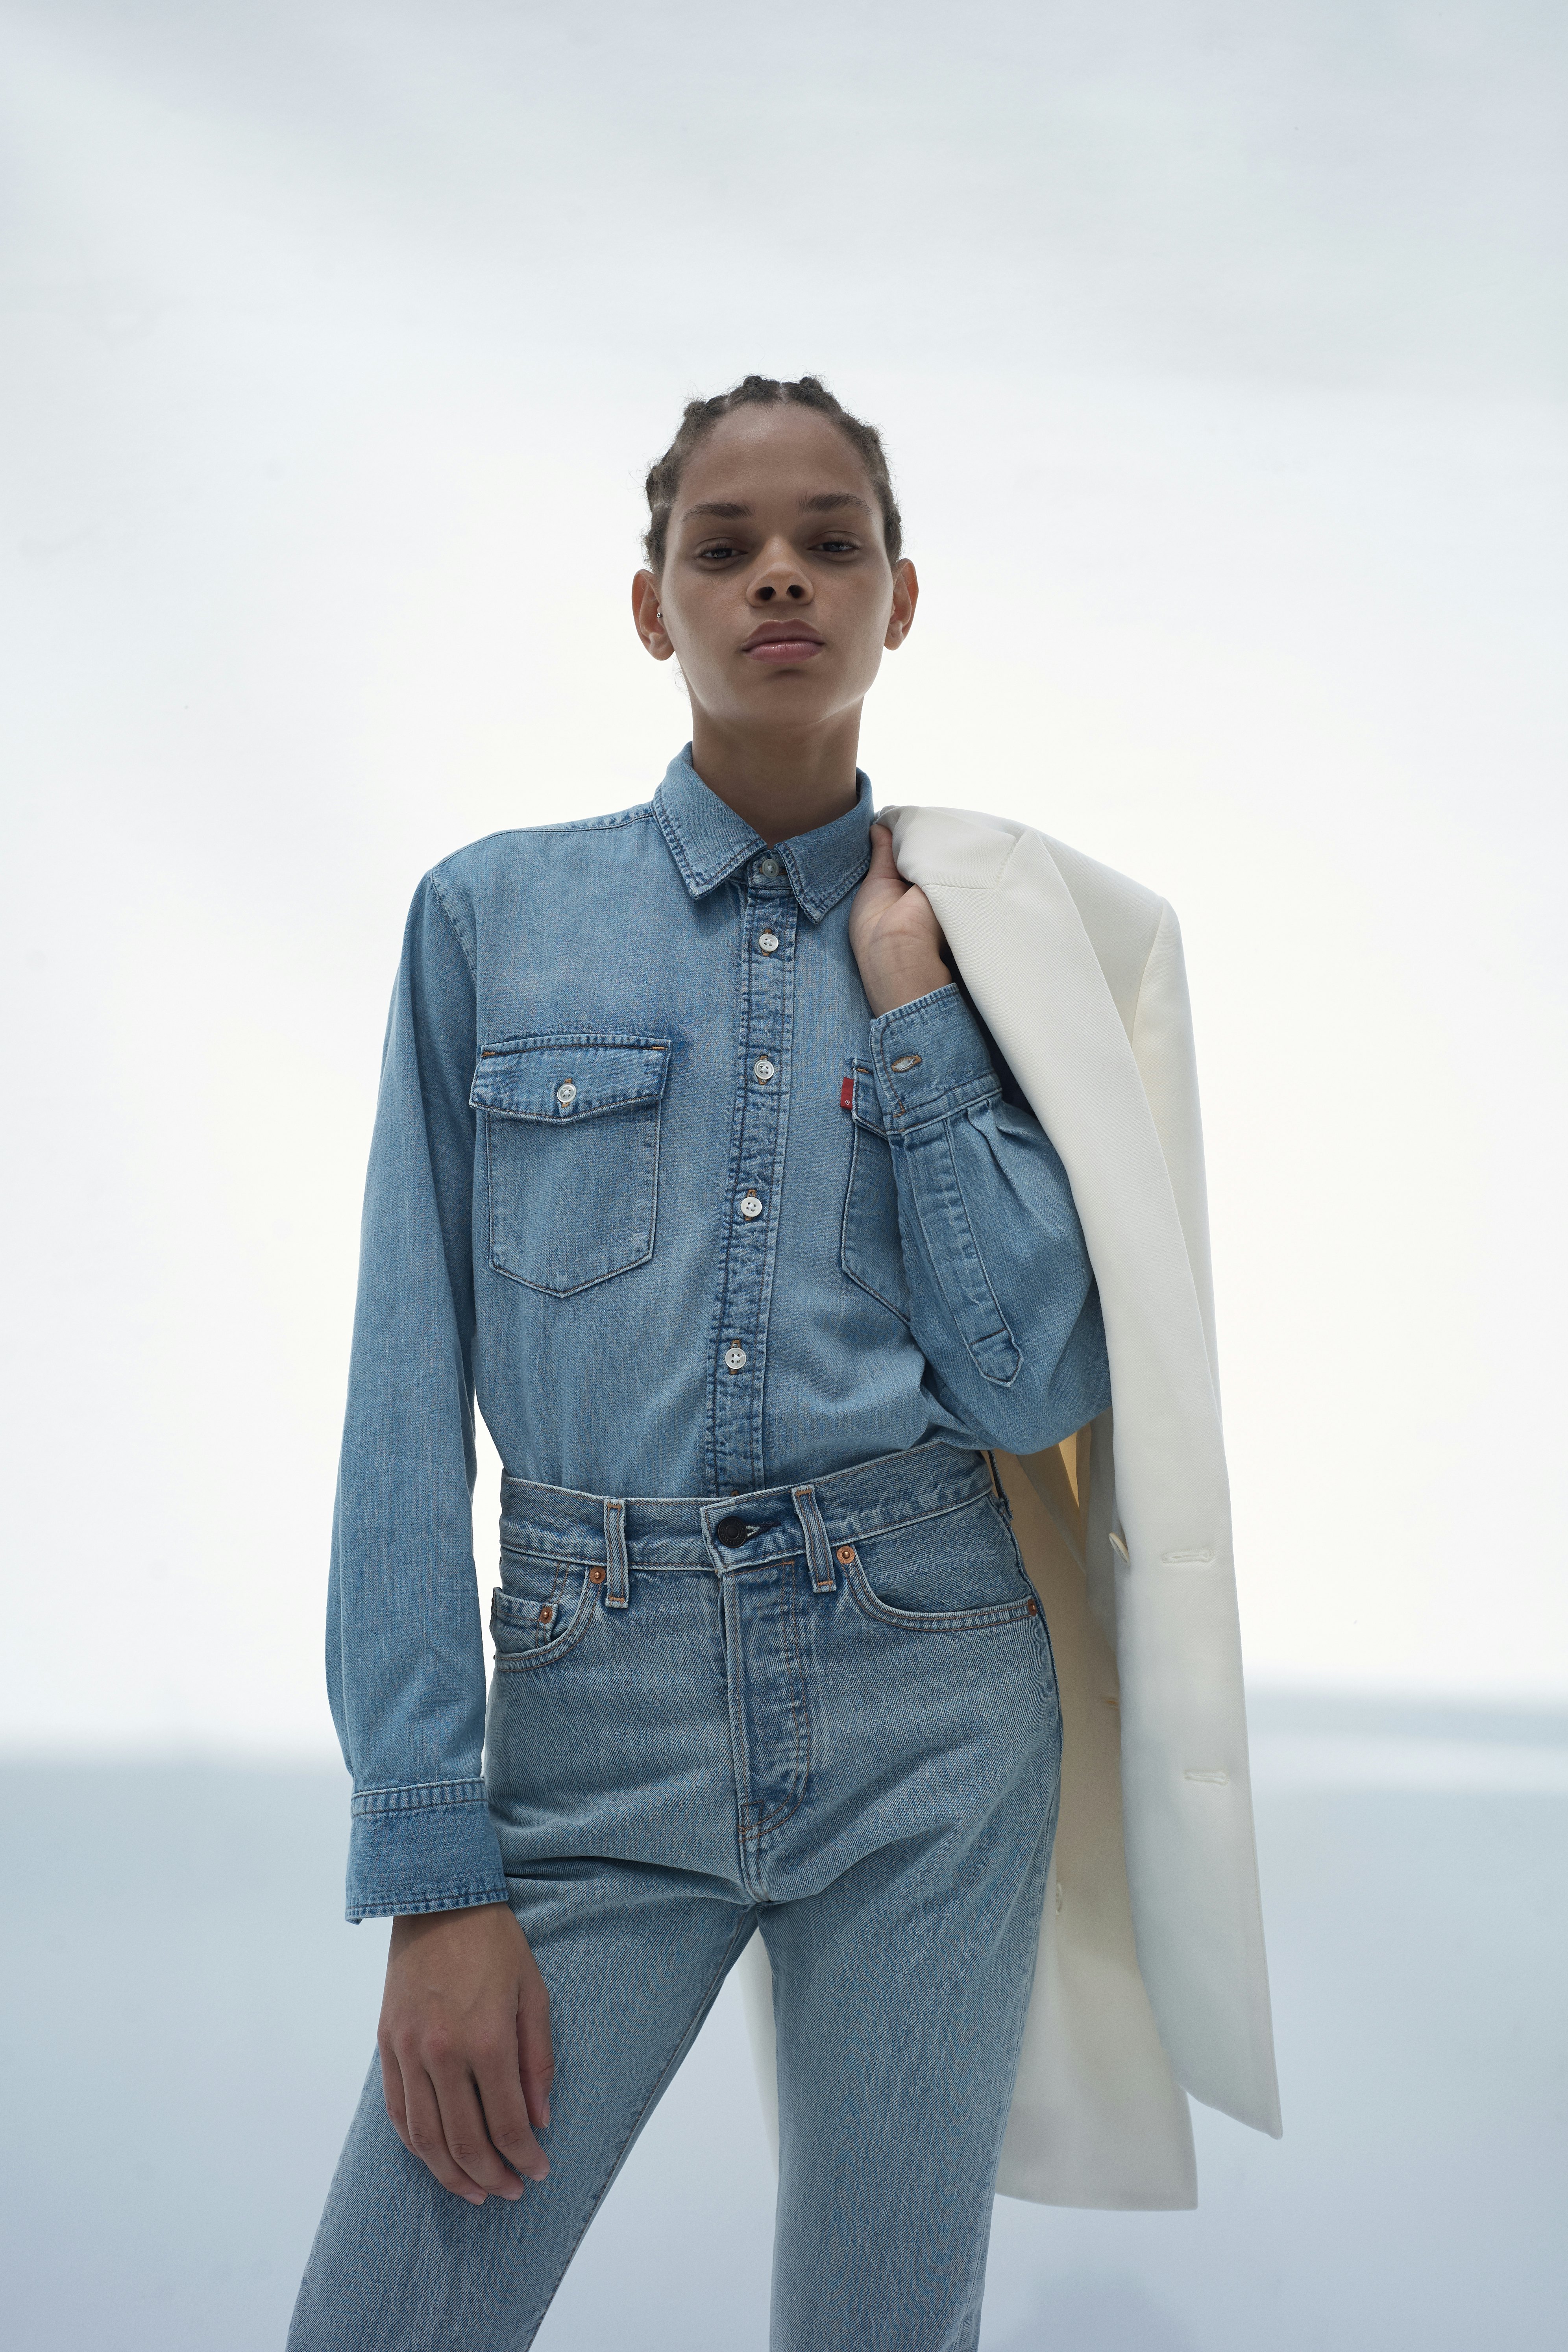 The WARDROBE.NYC x Levi's Collab Features A New Way To Shop These 